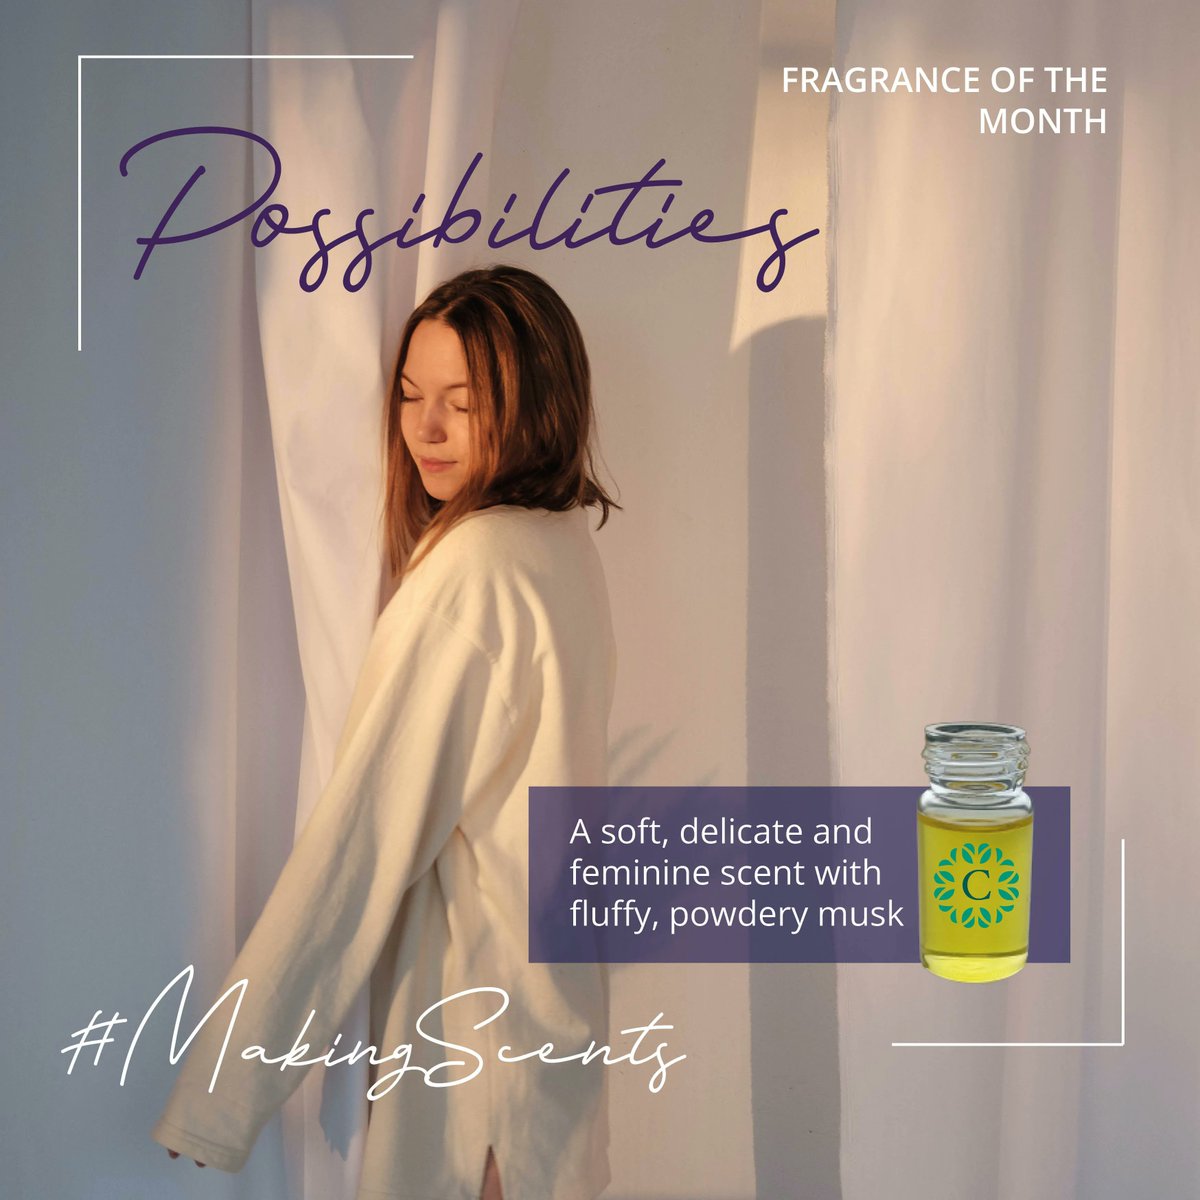 Launching our brand-new monthly feature – Our #FragranceoftheMonth.
Called Possibilities, this is a seductive soft yet fiery #composition. This #sensual and provocative #scent encapsulates a sultry yet passionate woman.
Contact us for samples.

#perfume #eaudetoilette